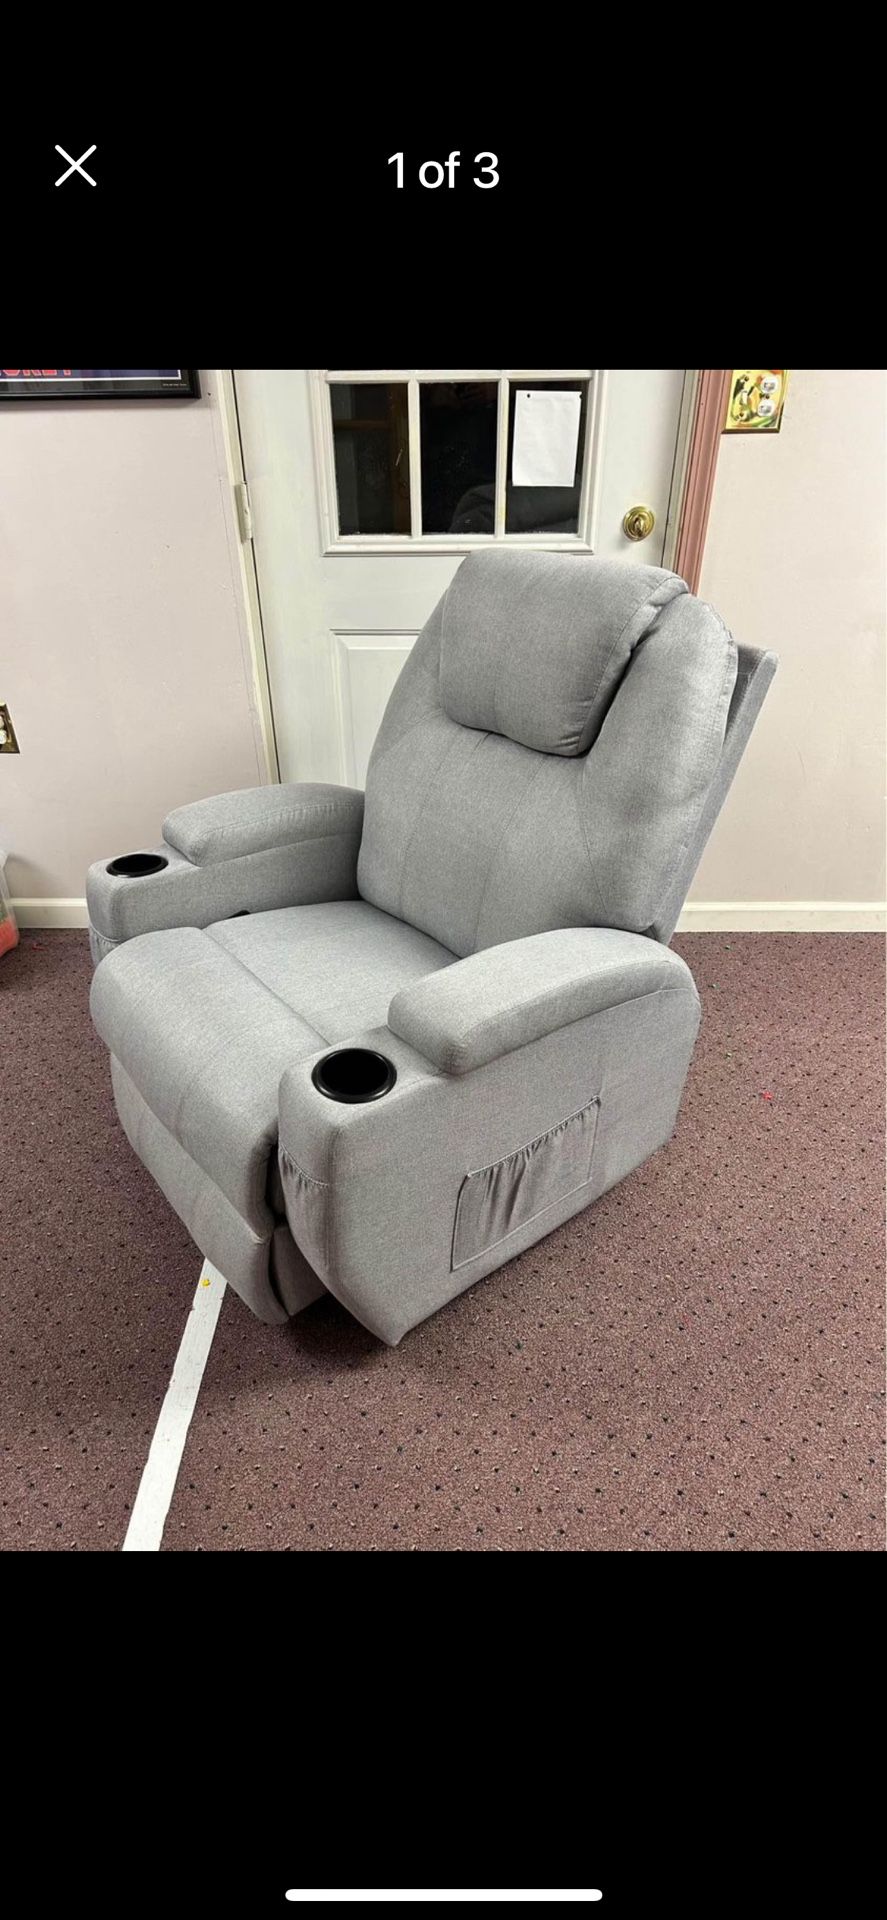 Manual (pull cord) Recliner with Heat & Vibration features